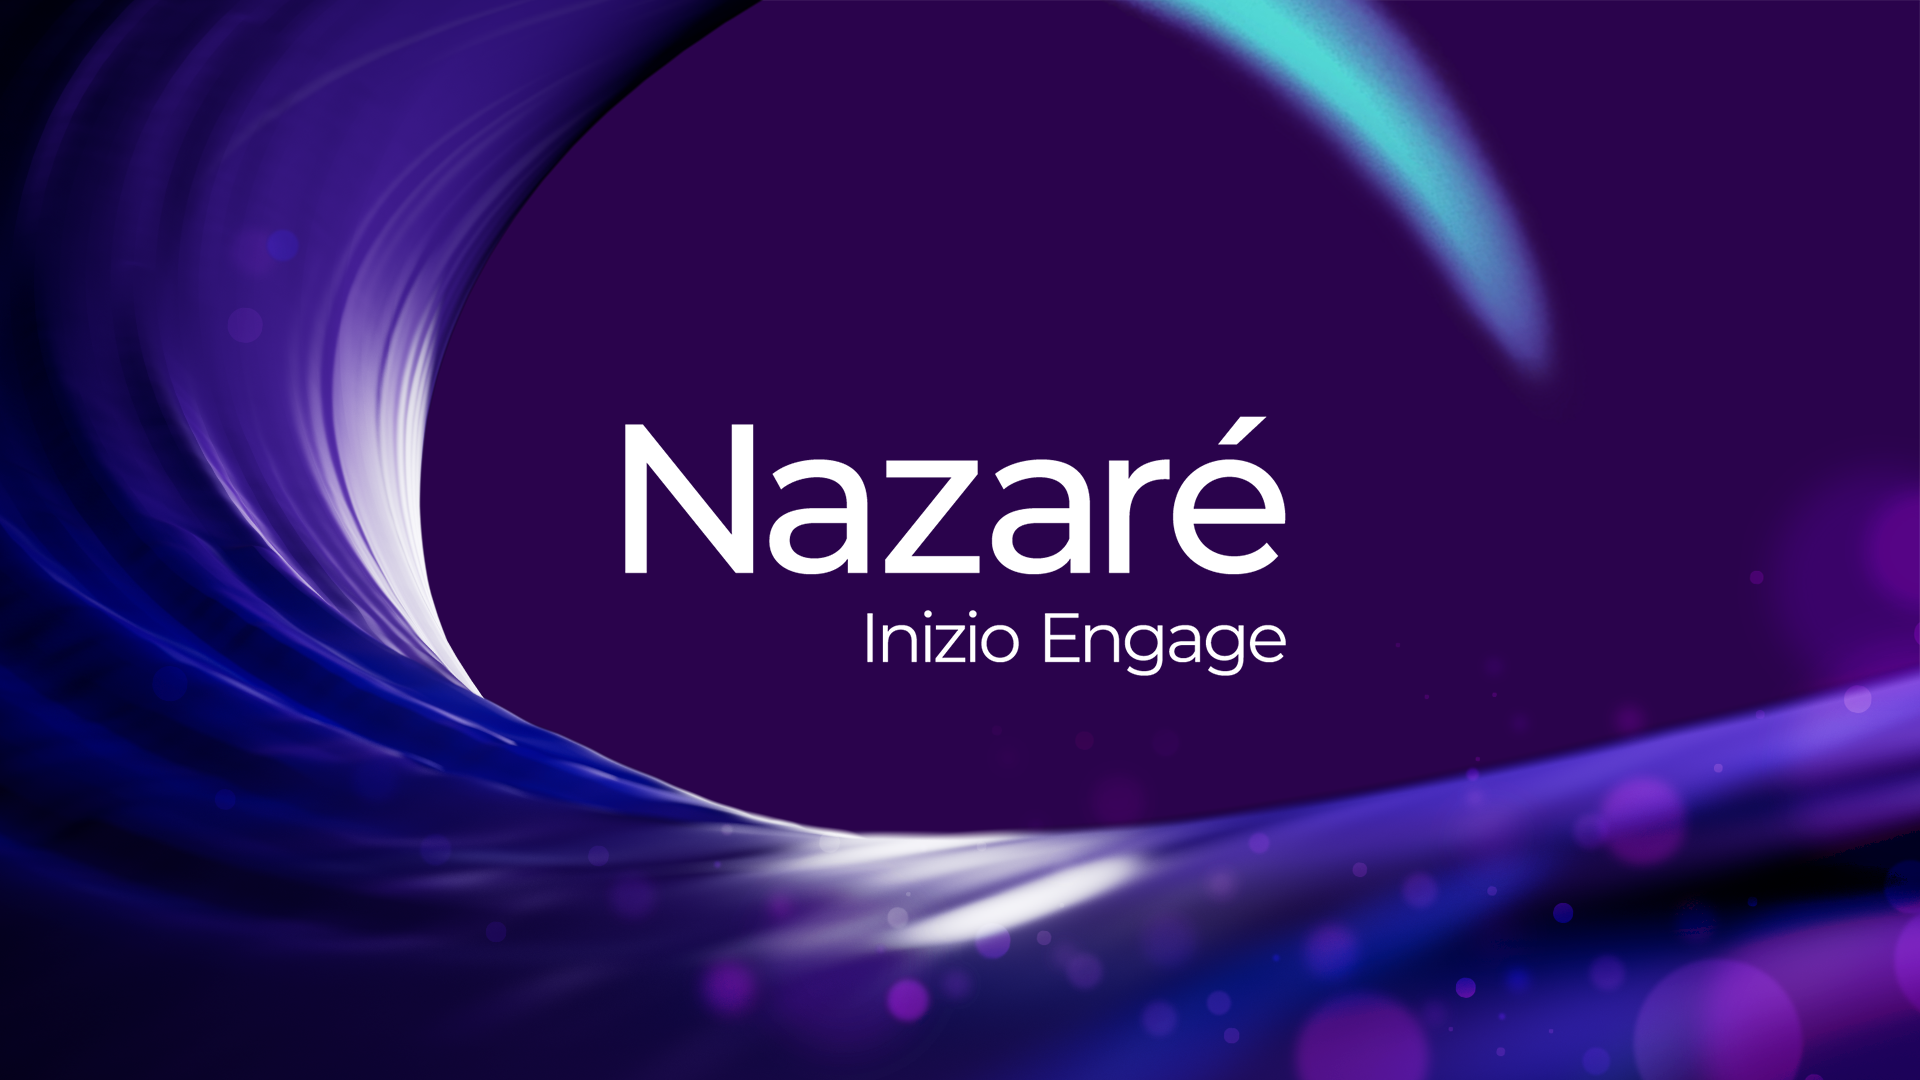 Inizio Engage launches new global powerhouse learning brand, Nazaré